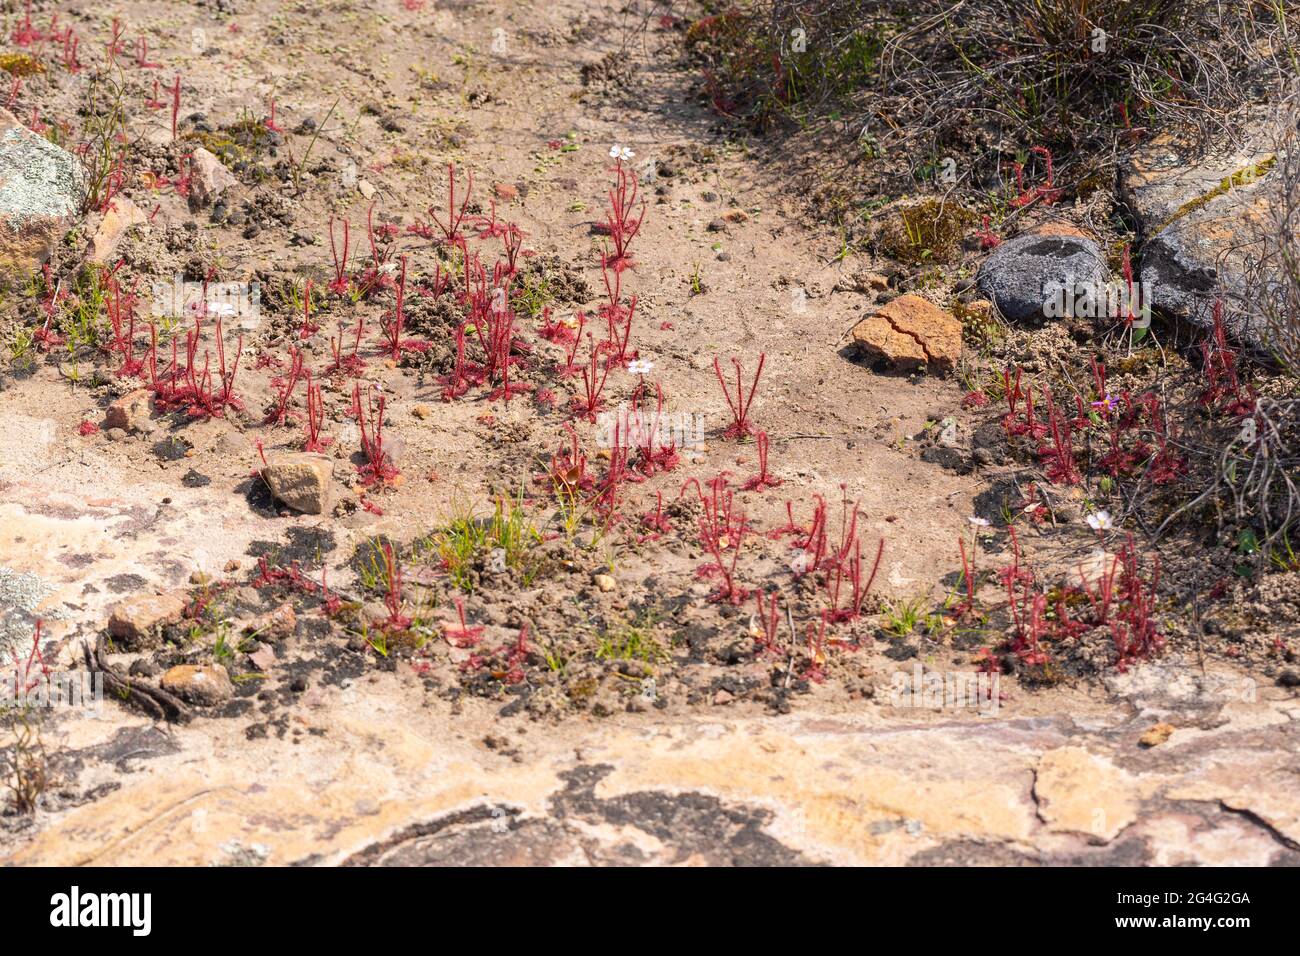 Colony of the carnivorous plant Drosera alba from the Sundew family seen in natural habitat close to VanRhynsdorp in the Western Cape of South Africa Stock Photo